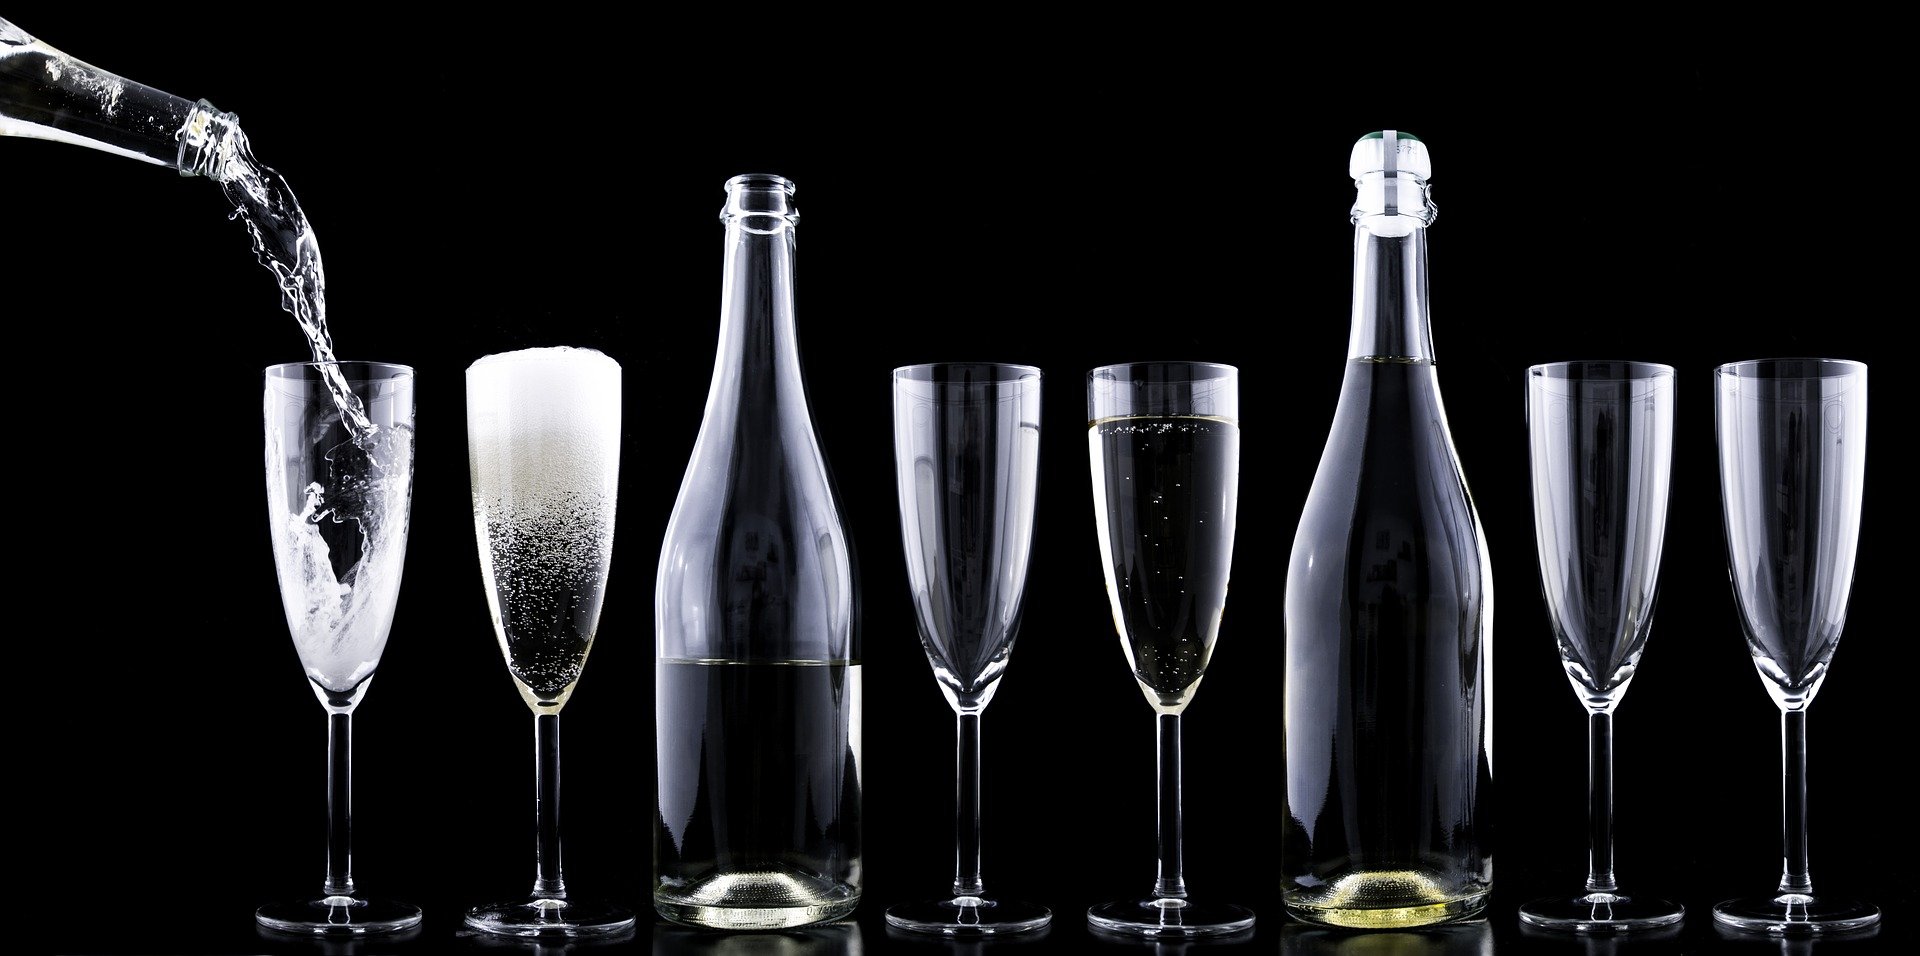 Have a glass of champagne on new year's eve